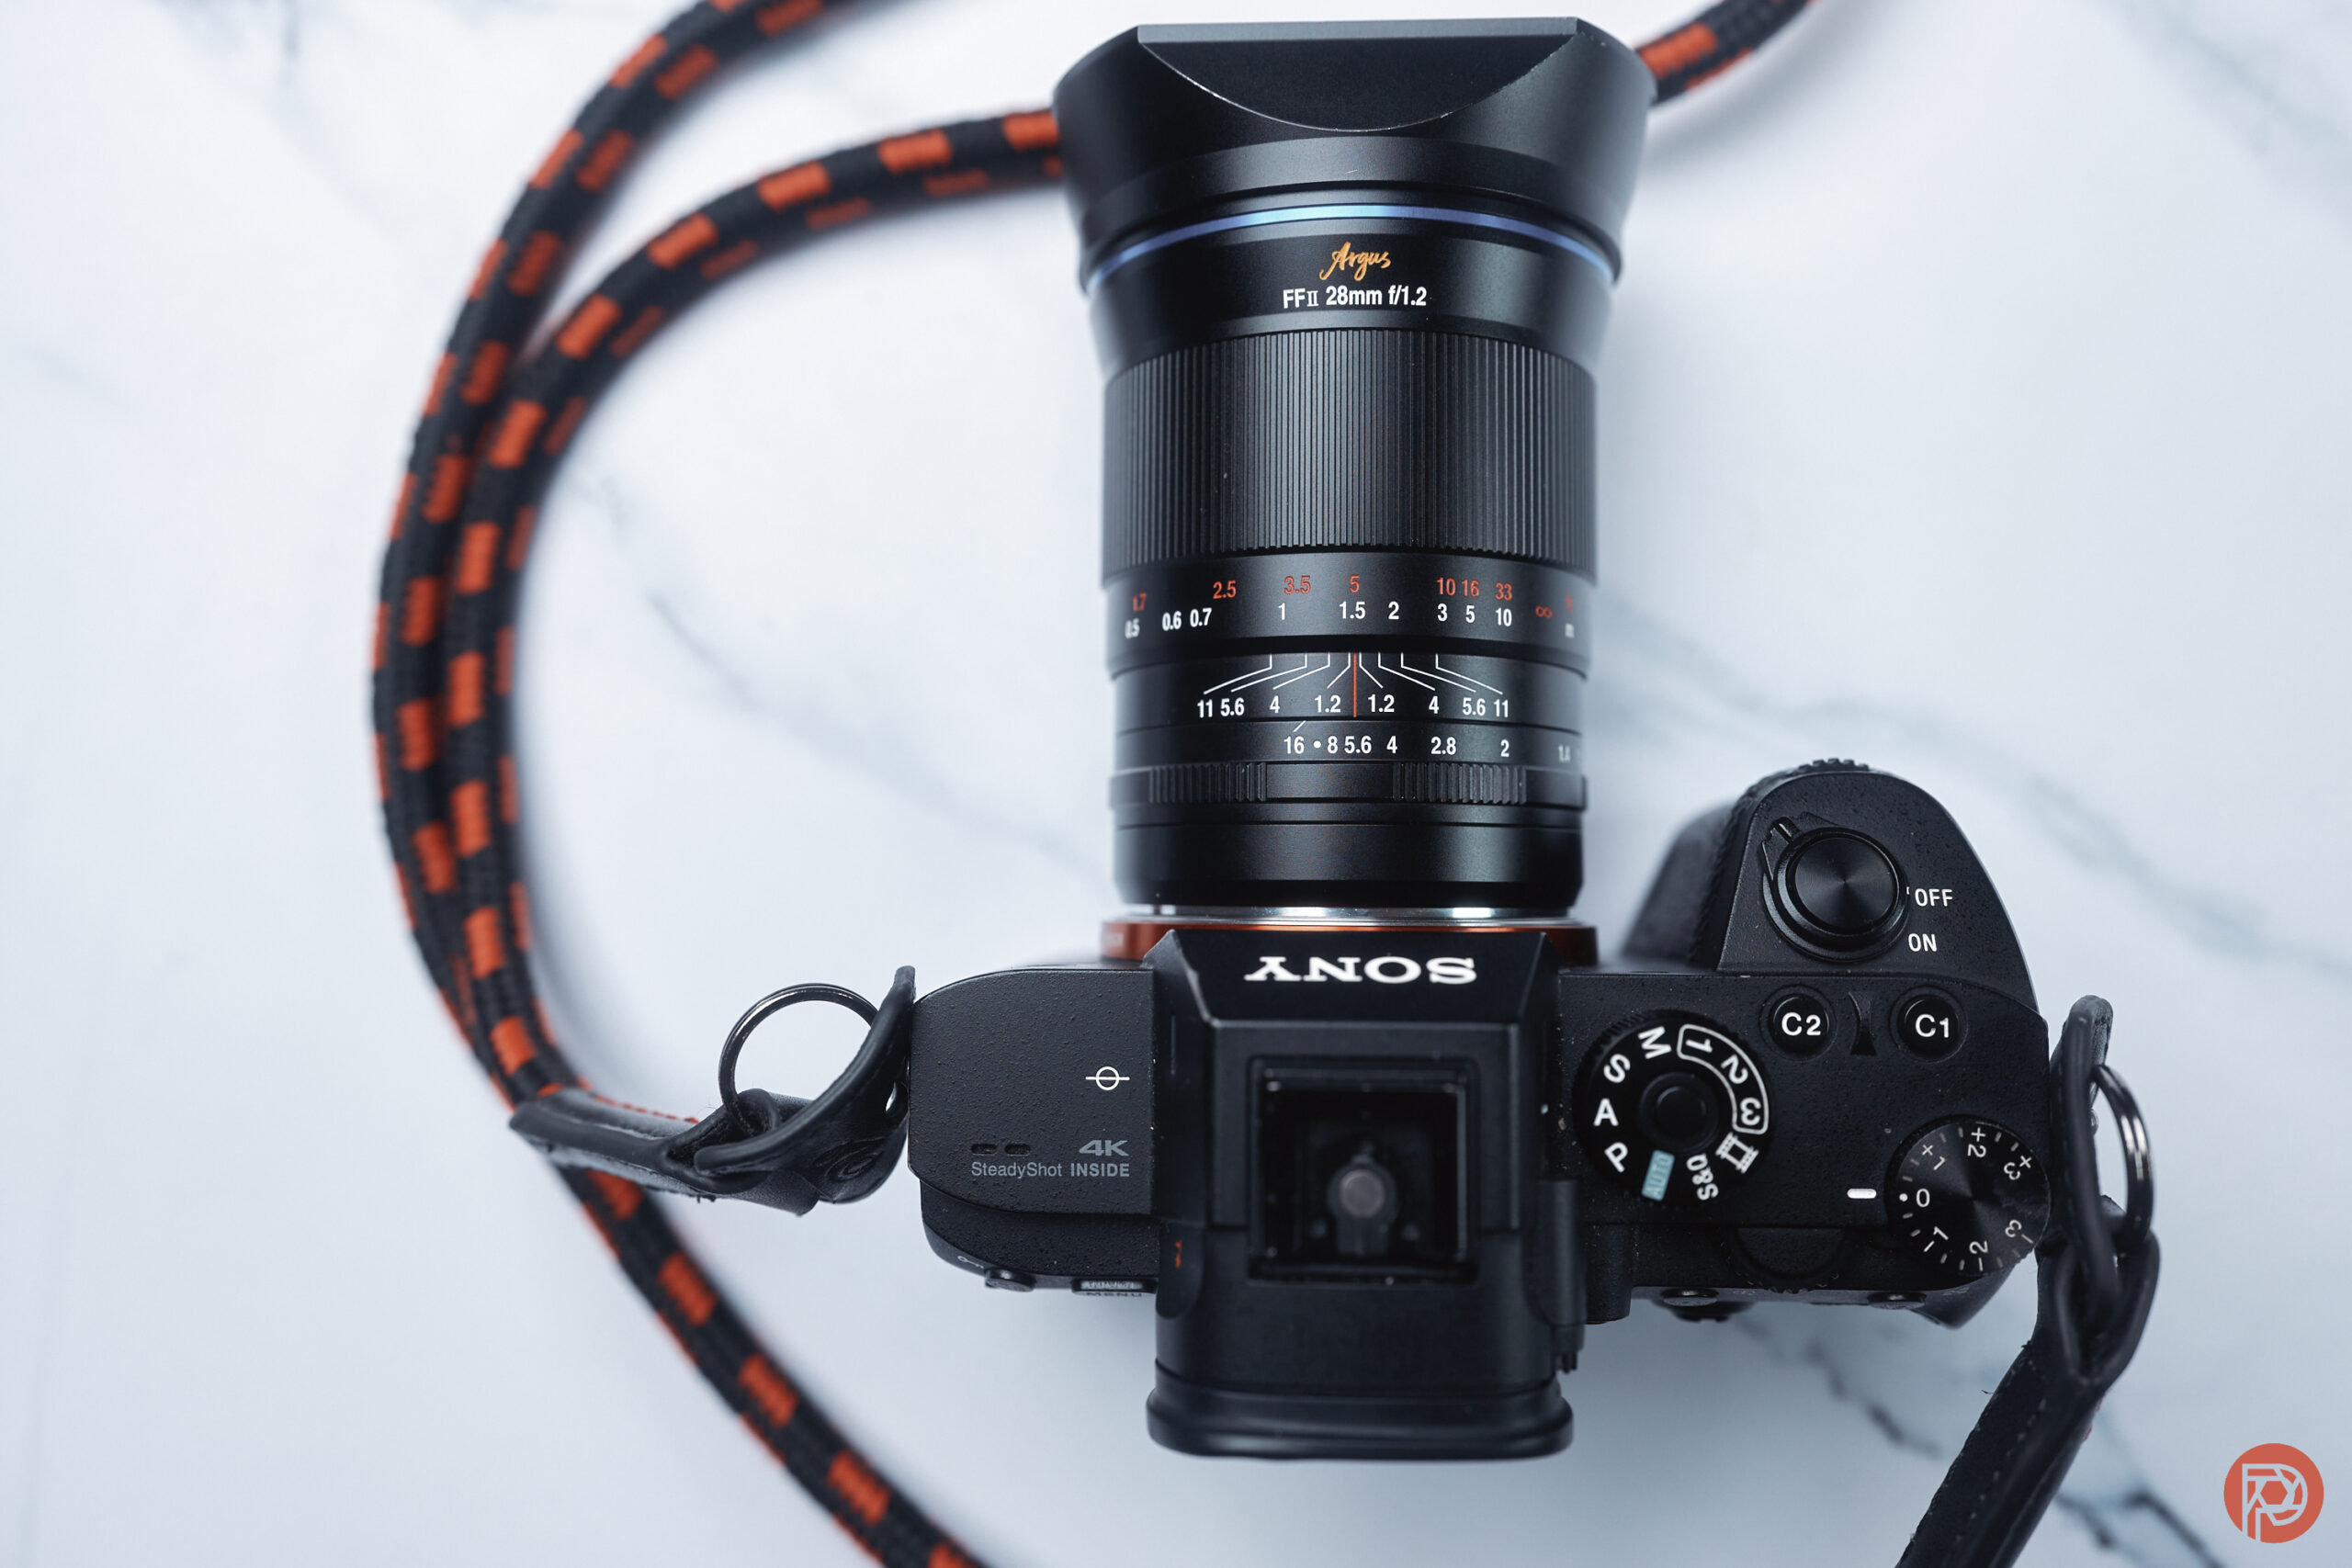 Chris Gampat The Phoblographer Laowa 28mm f1.2 review product images 3.51-160s400 2